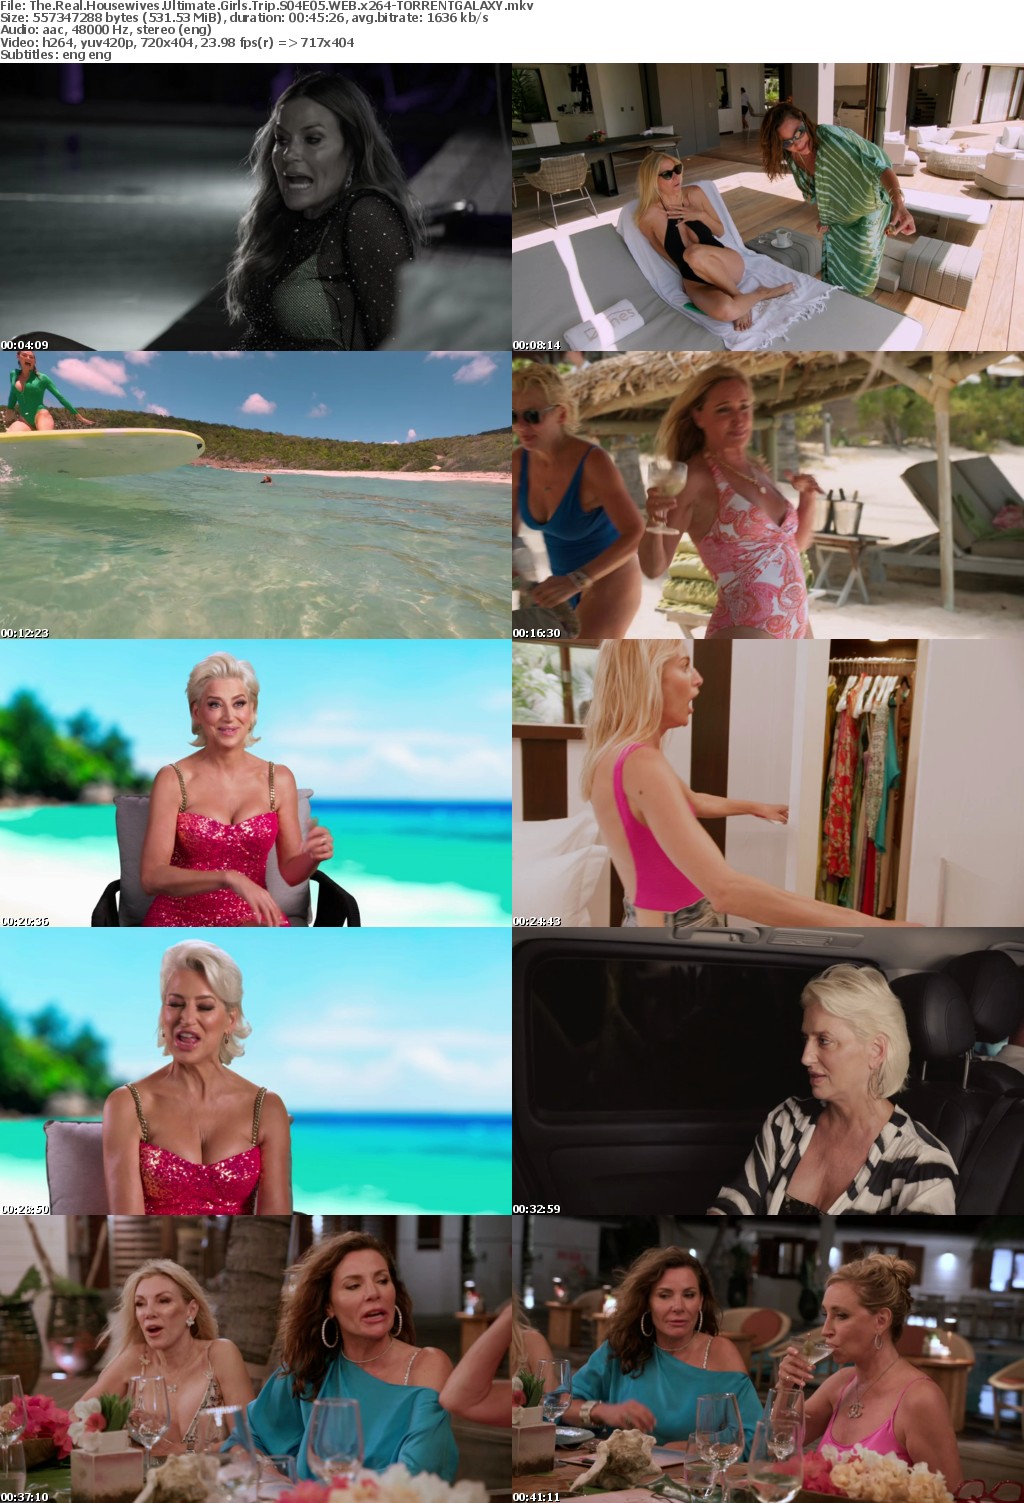 The Real Housewives Ultimate Girls Trip S04E05 WEB x264-GALAXY